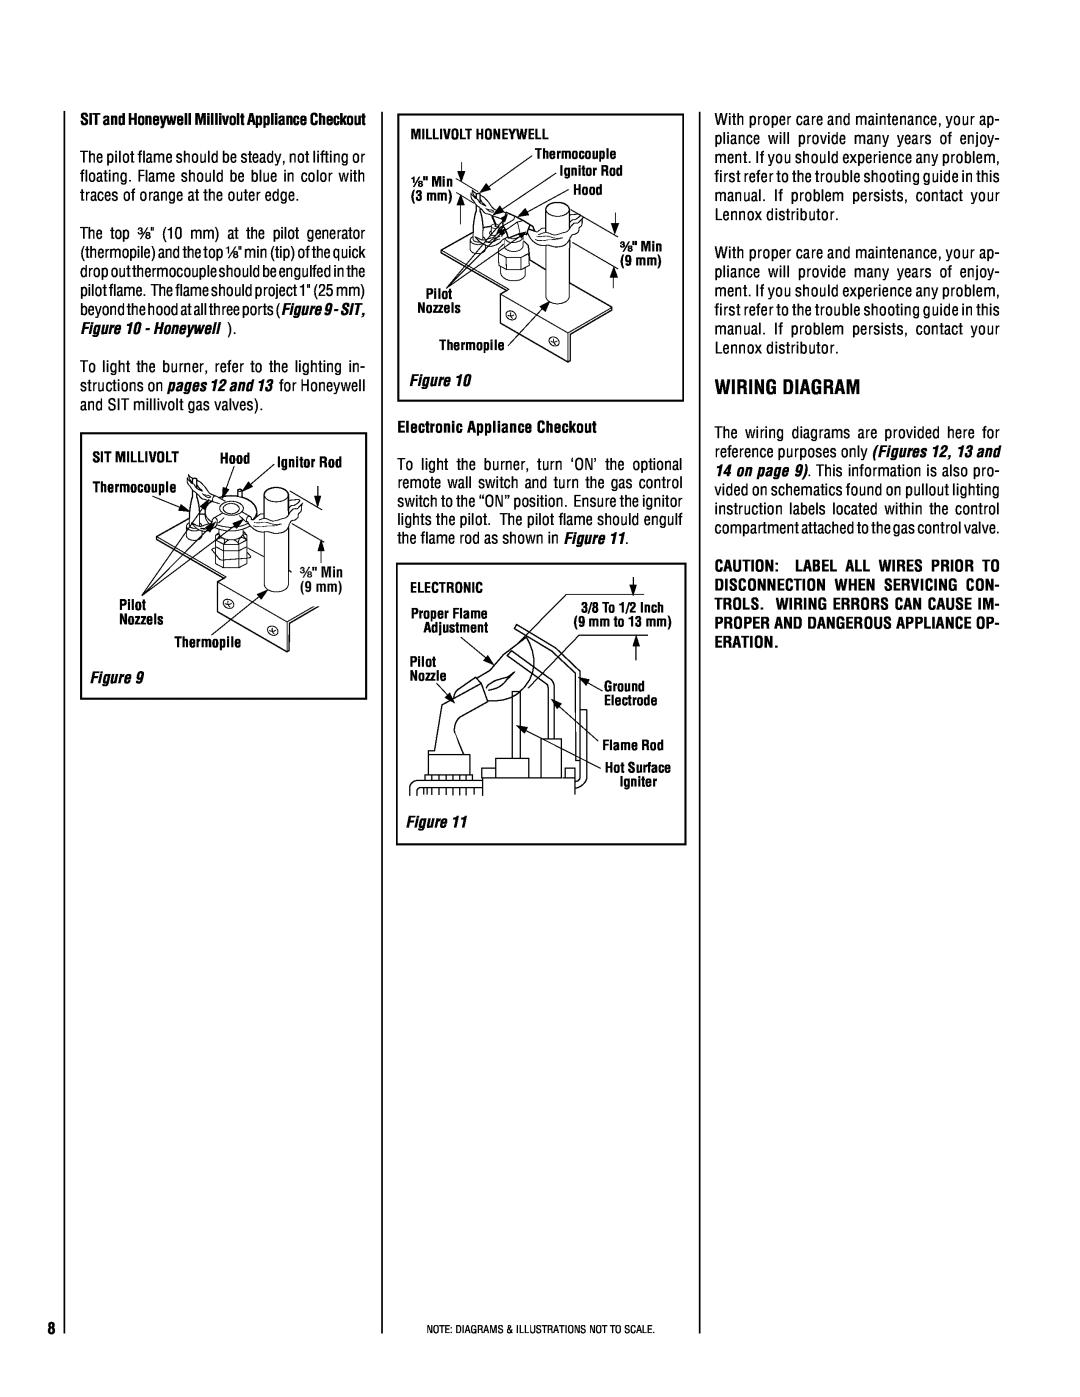 Superior NMC004-TD, NEC004-TD manual Wiring Diagram, Electronic Appliance Checkout 